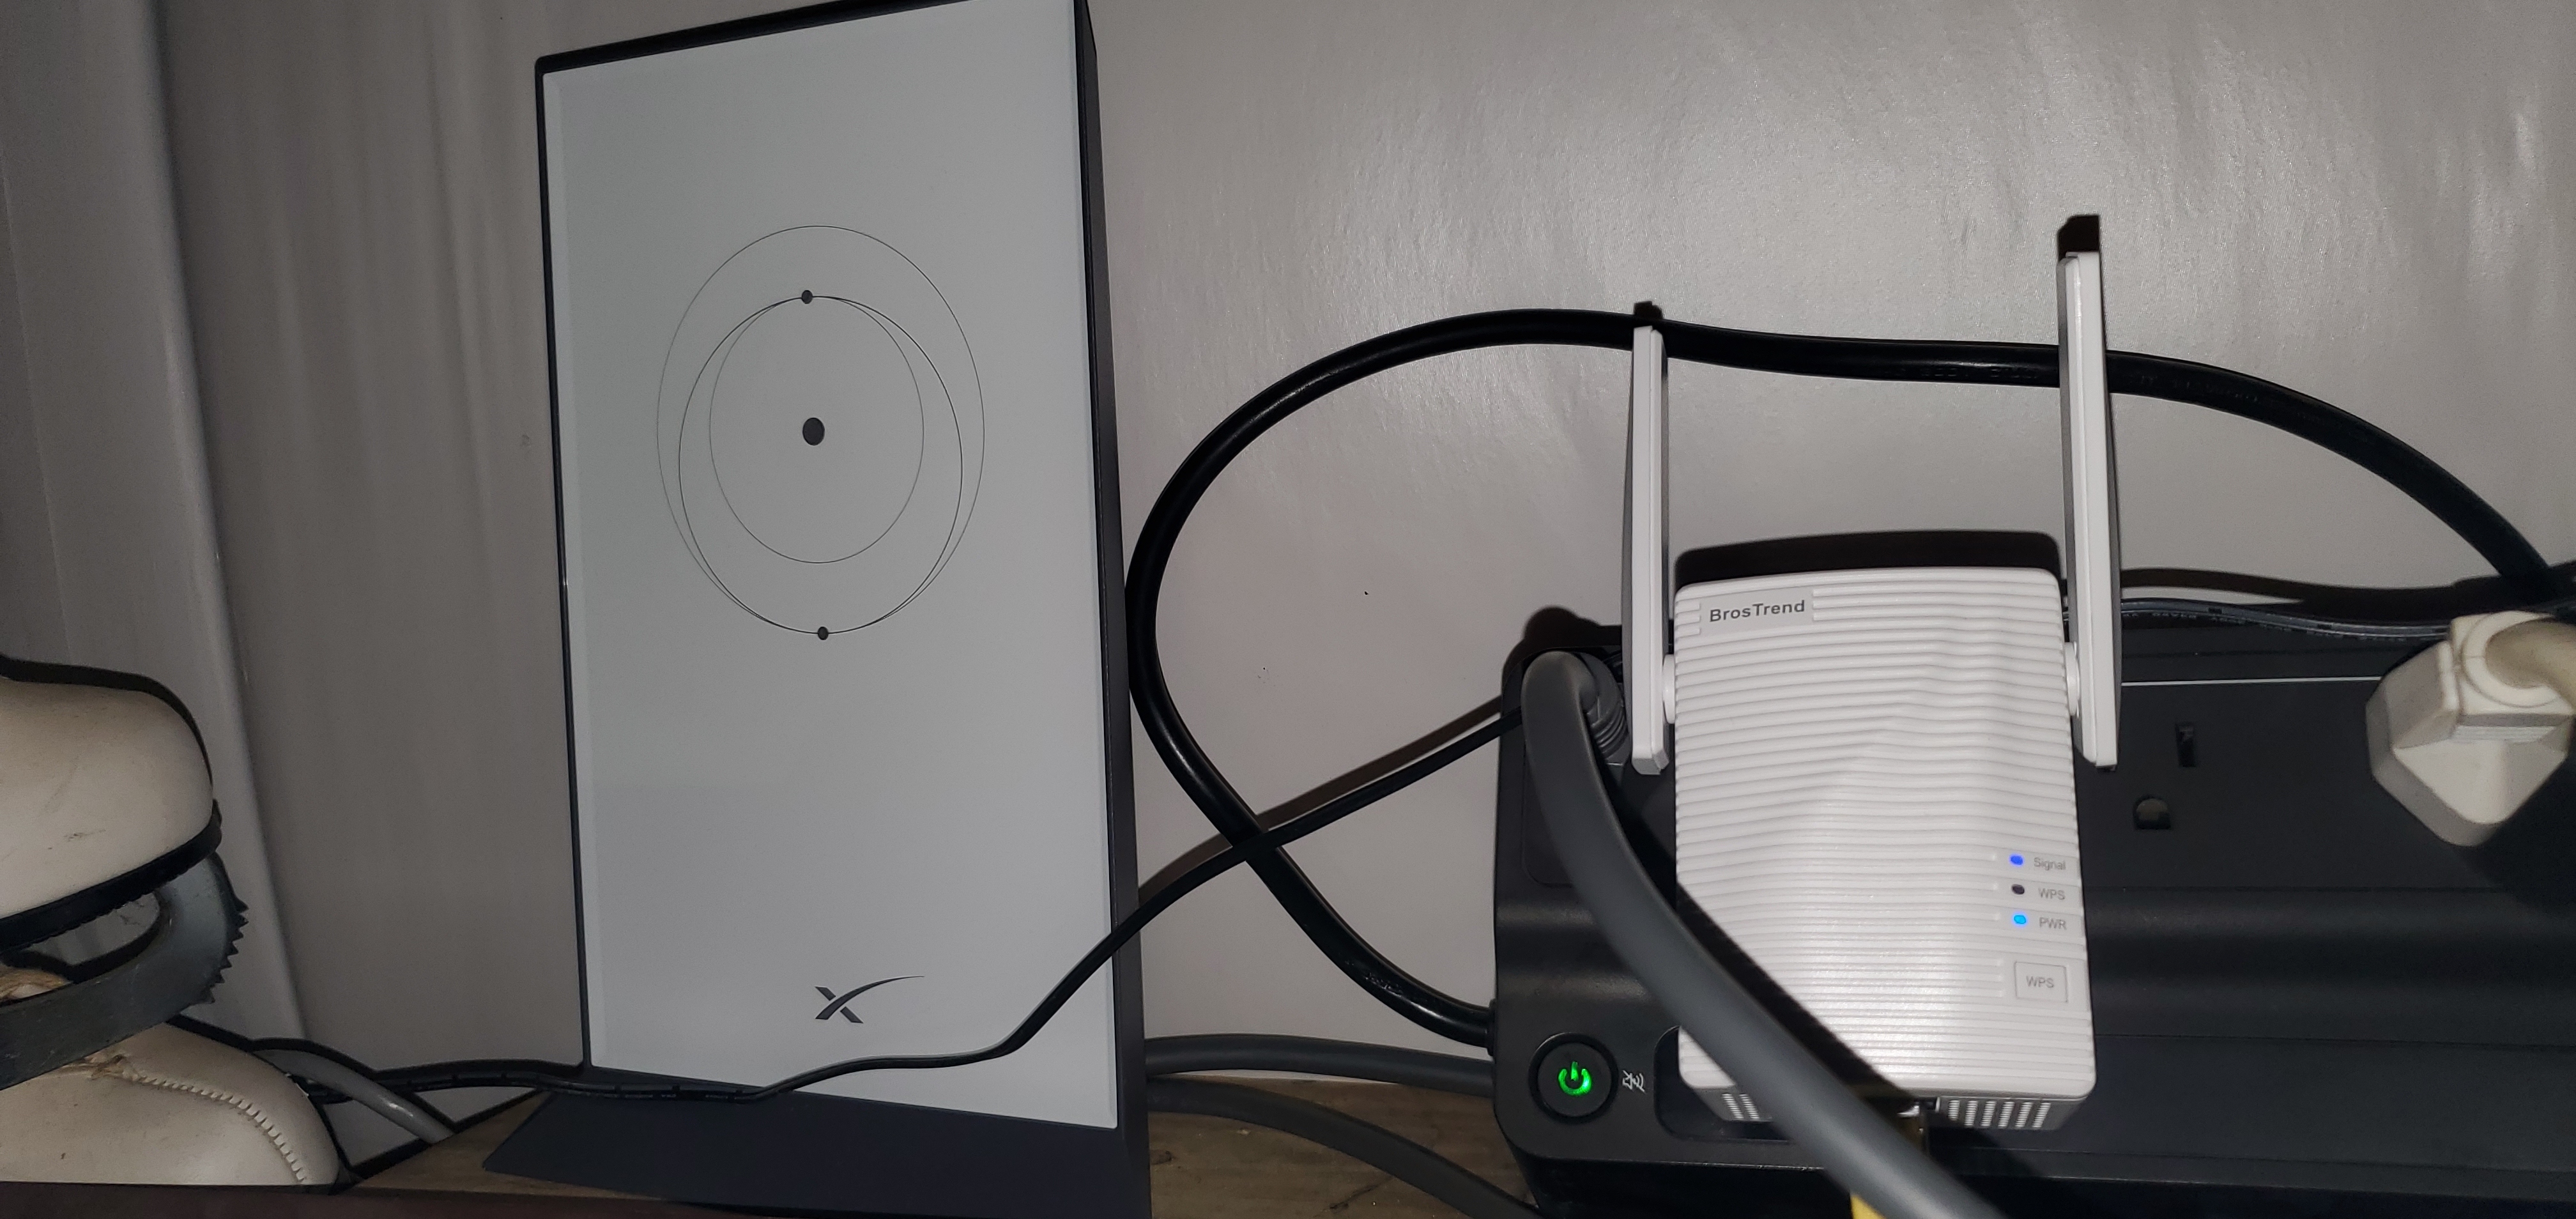 Starlink router, BrosTrend RJ45 adapter